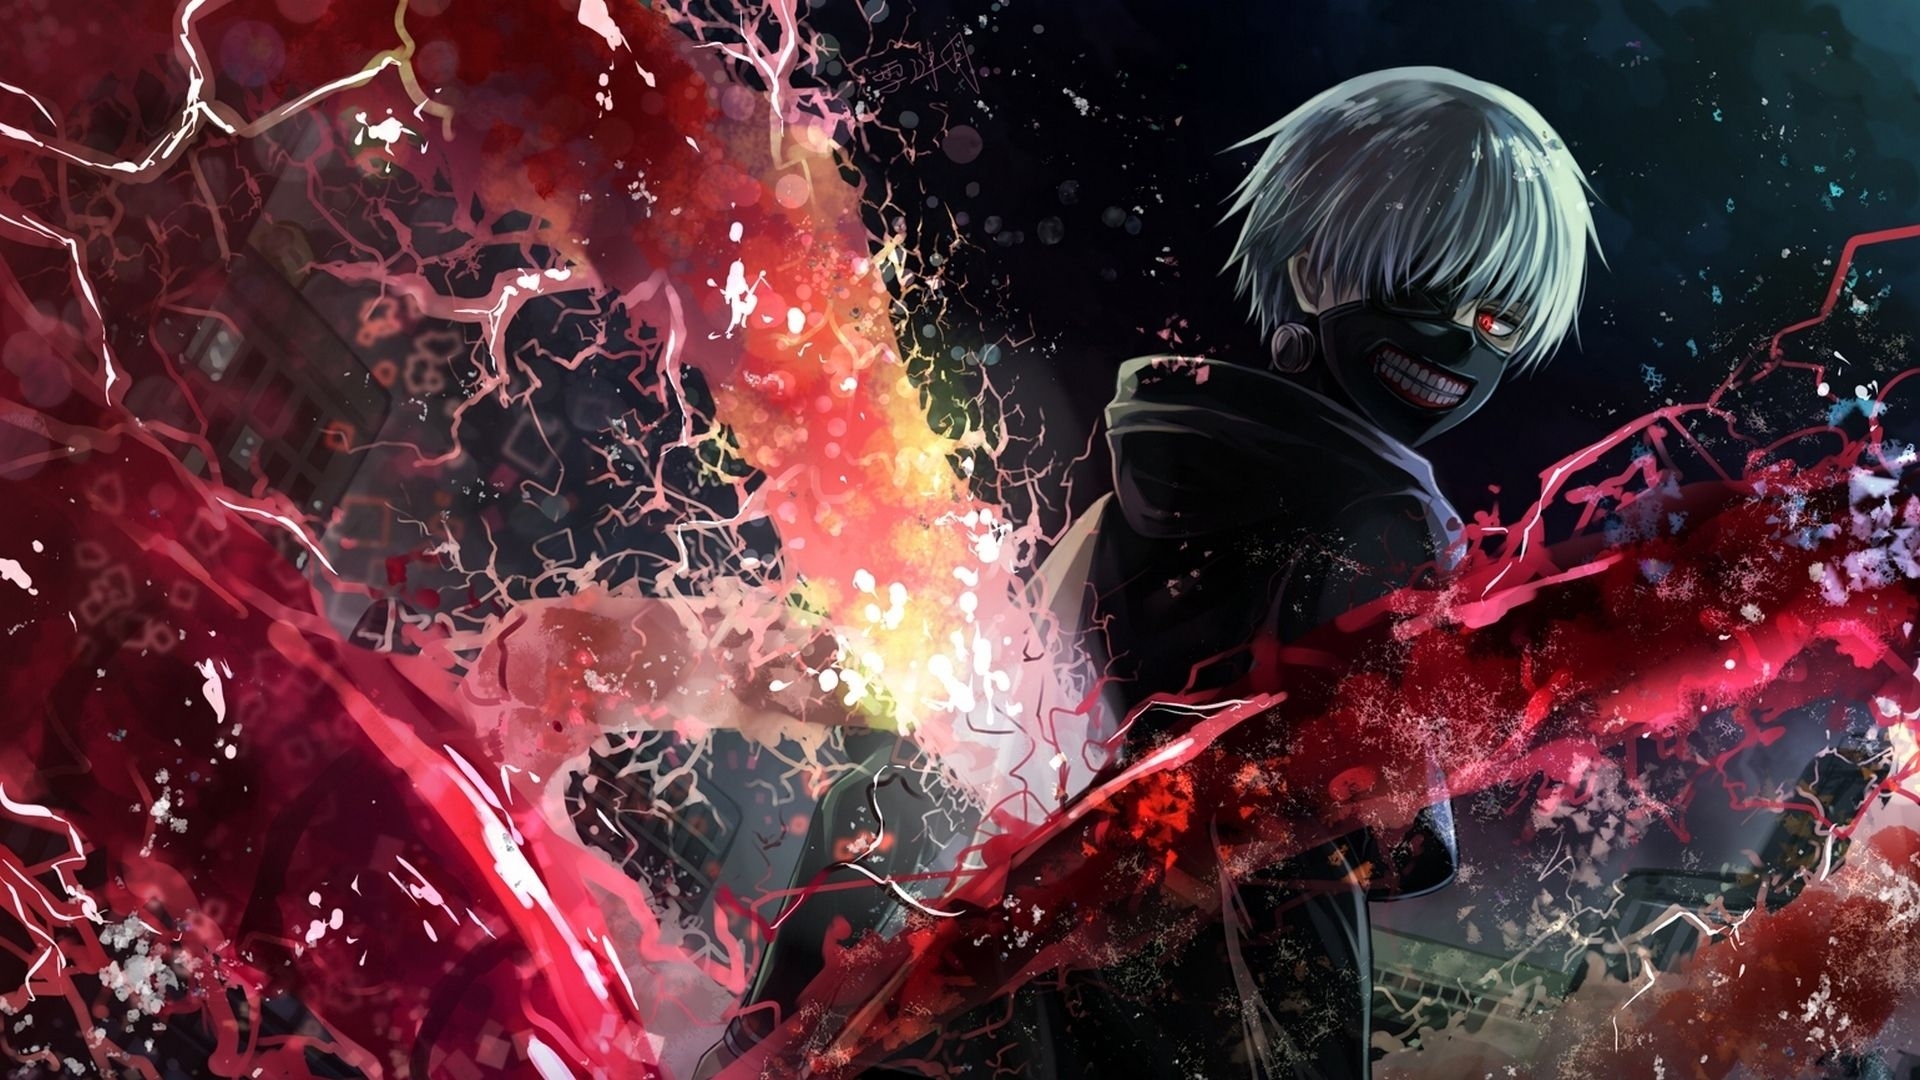 10 Best Anime Wallpapers  Hd 1920X1080 FULL HD 1080p For PC 